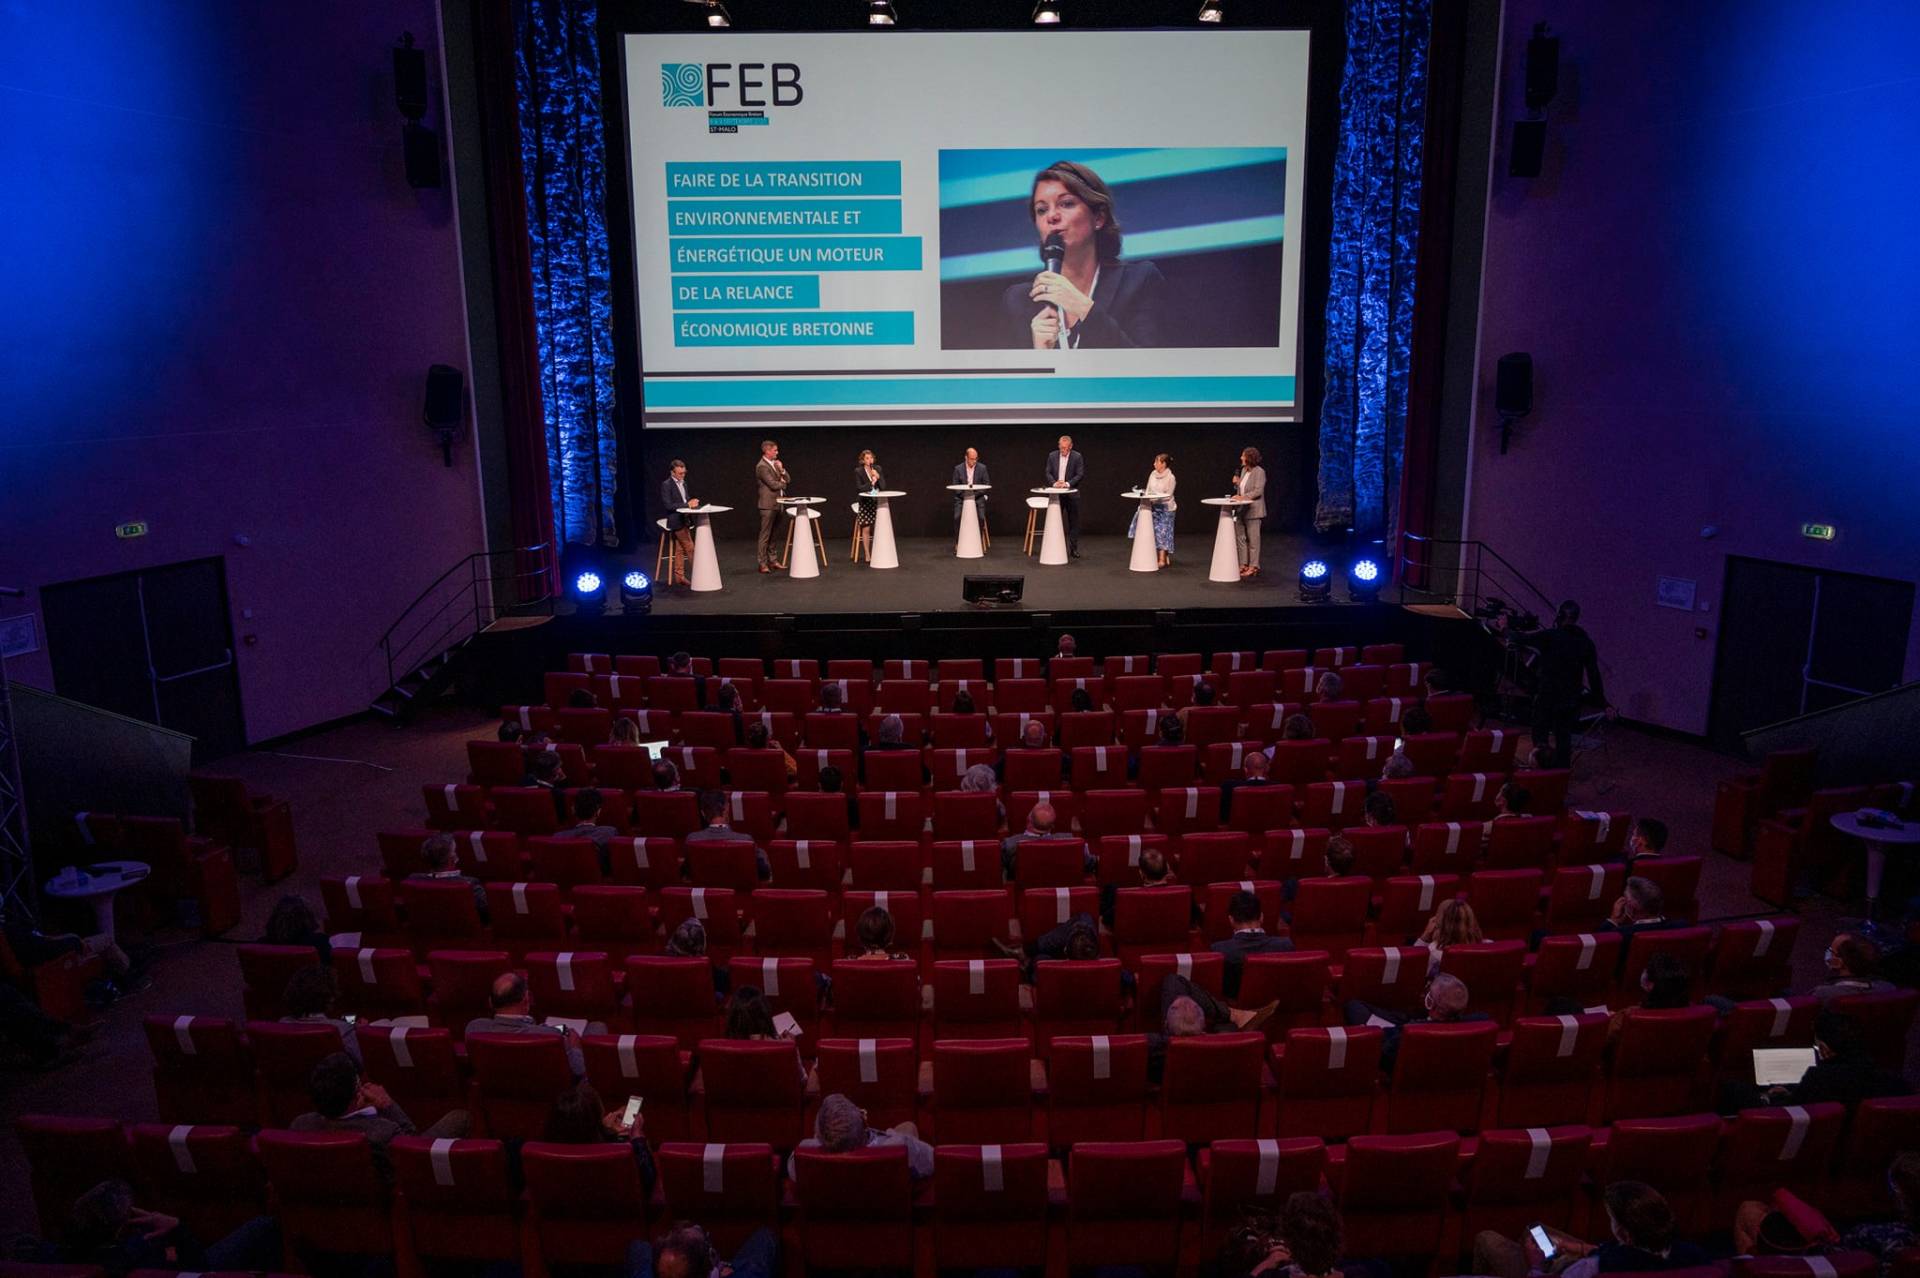 On September 8 and 9, 2020, the Breton Economic Forum brought together economic, financial and public decision-makers from Brittany at the Palais du Grand Large in Saint-Malo.